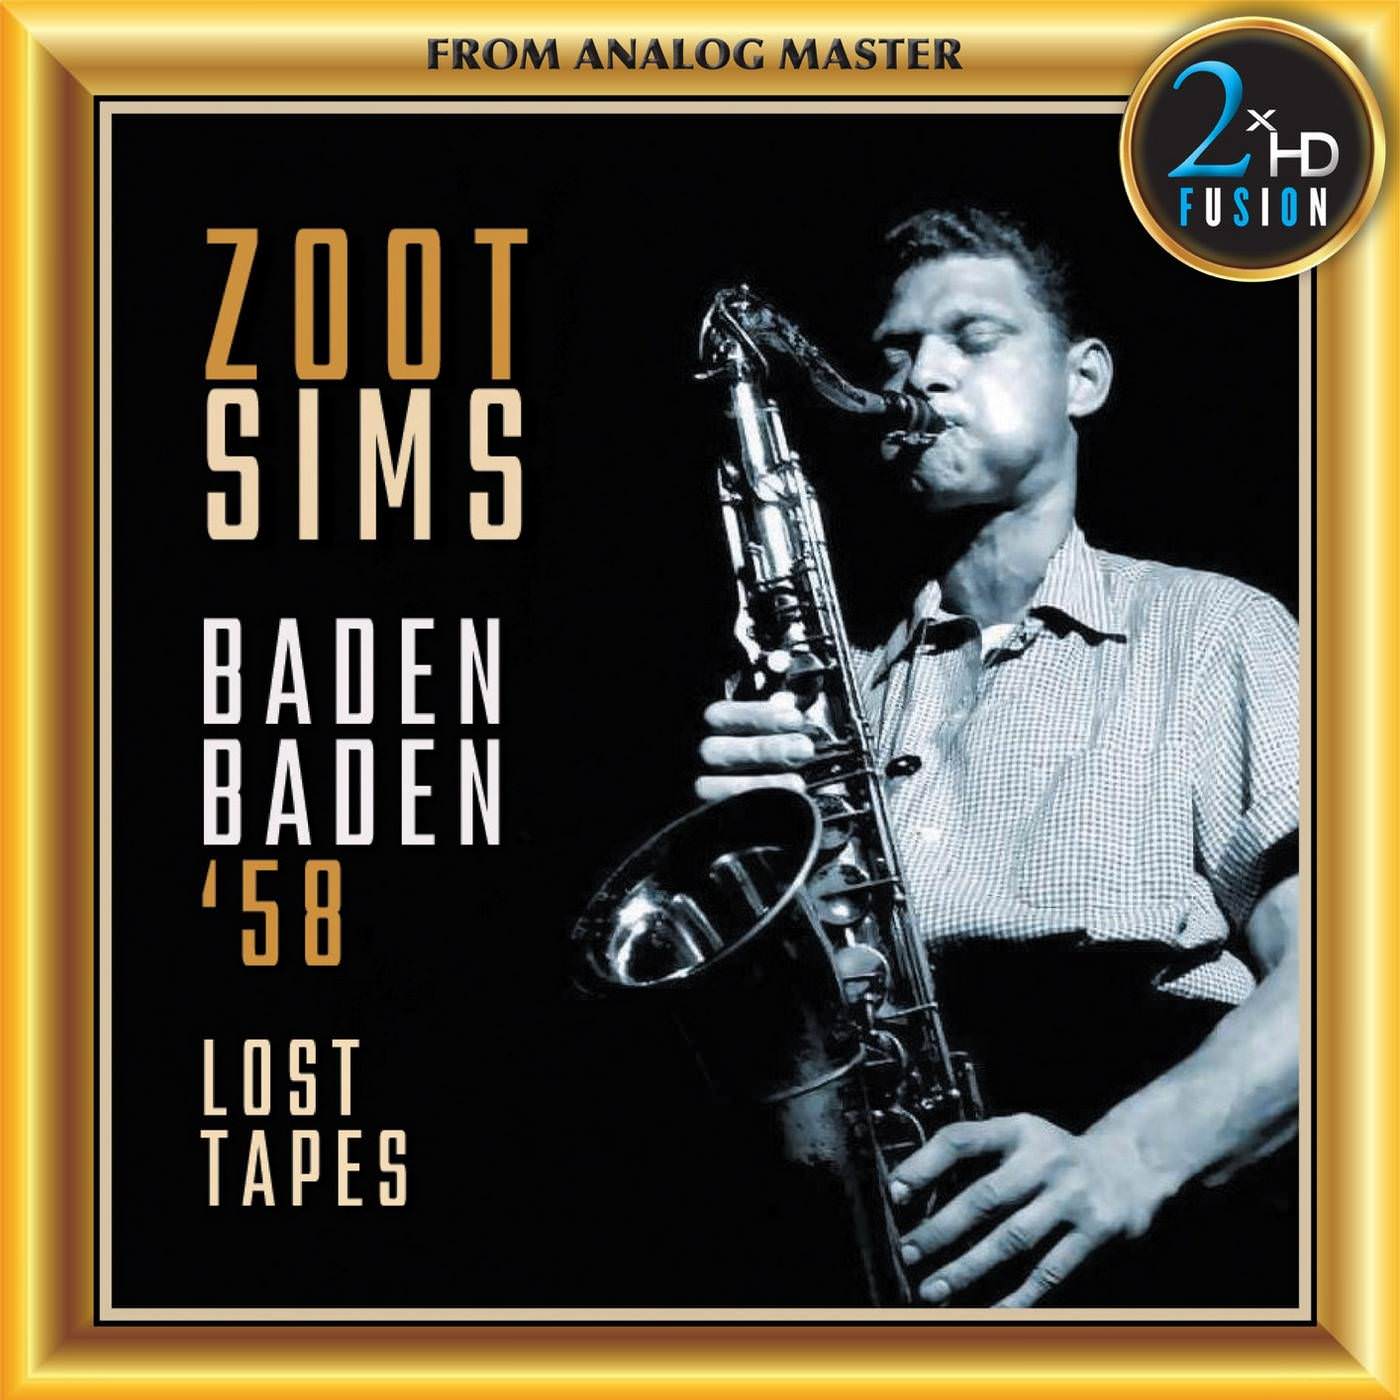 Zoot Sims – Baden Baden ’58 Lost Tapes (Remastered) (2018) [FLAC 24bit/192kHz]